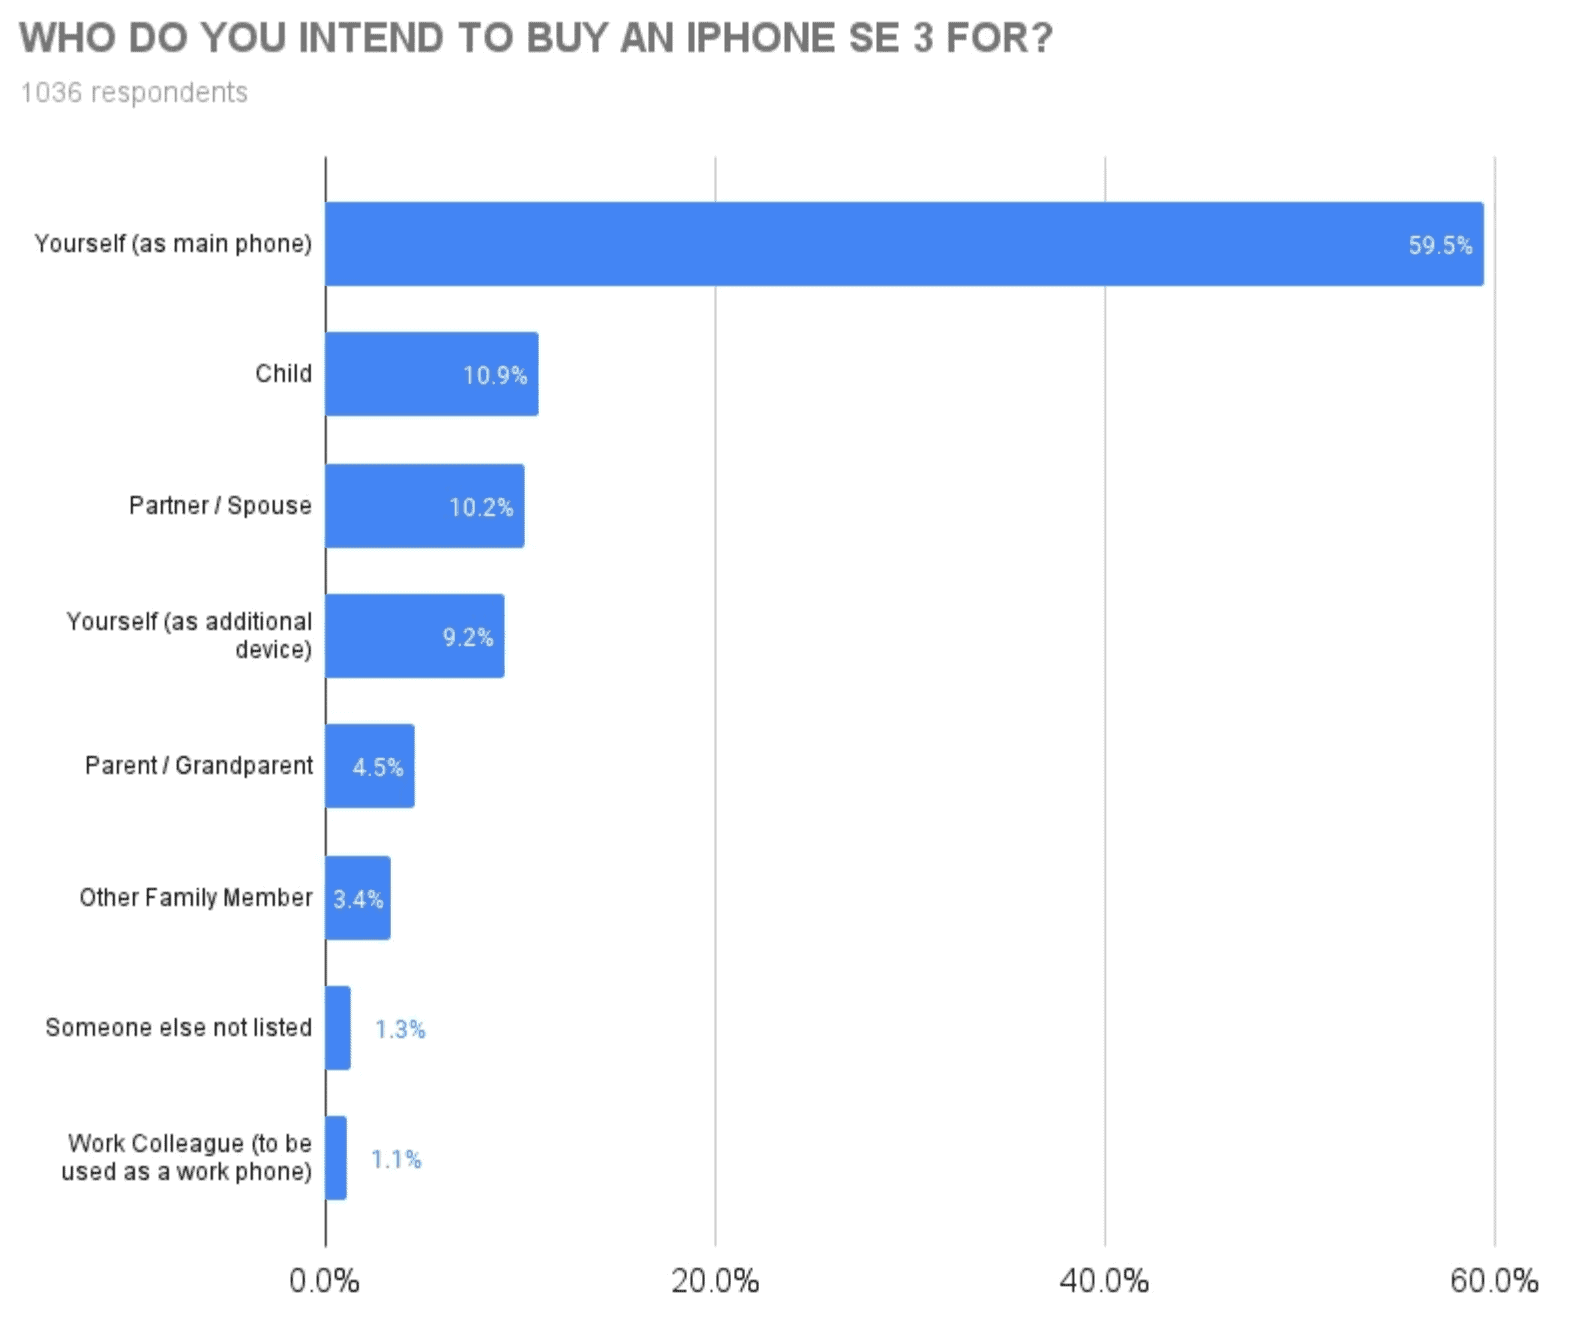 who do you intend to buy an iphone se for